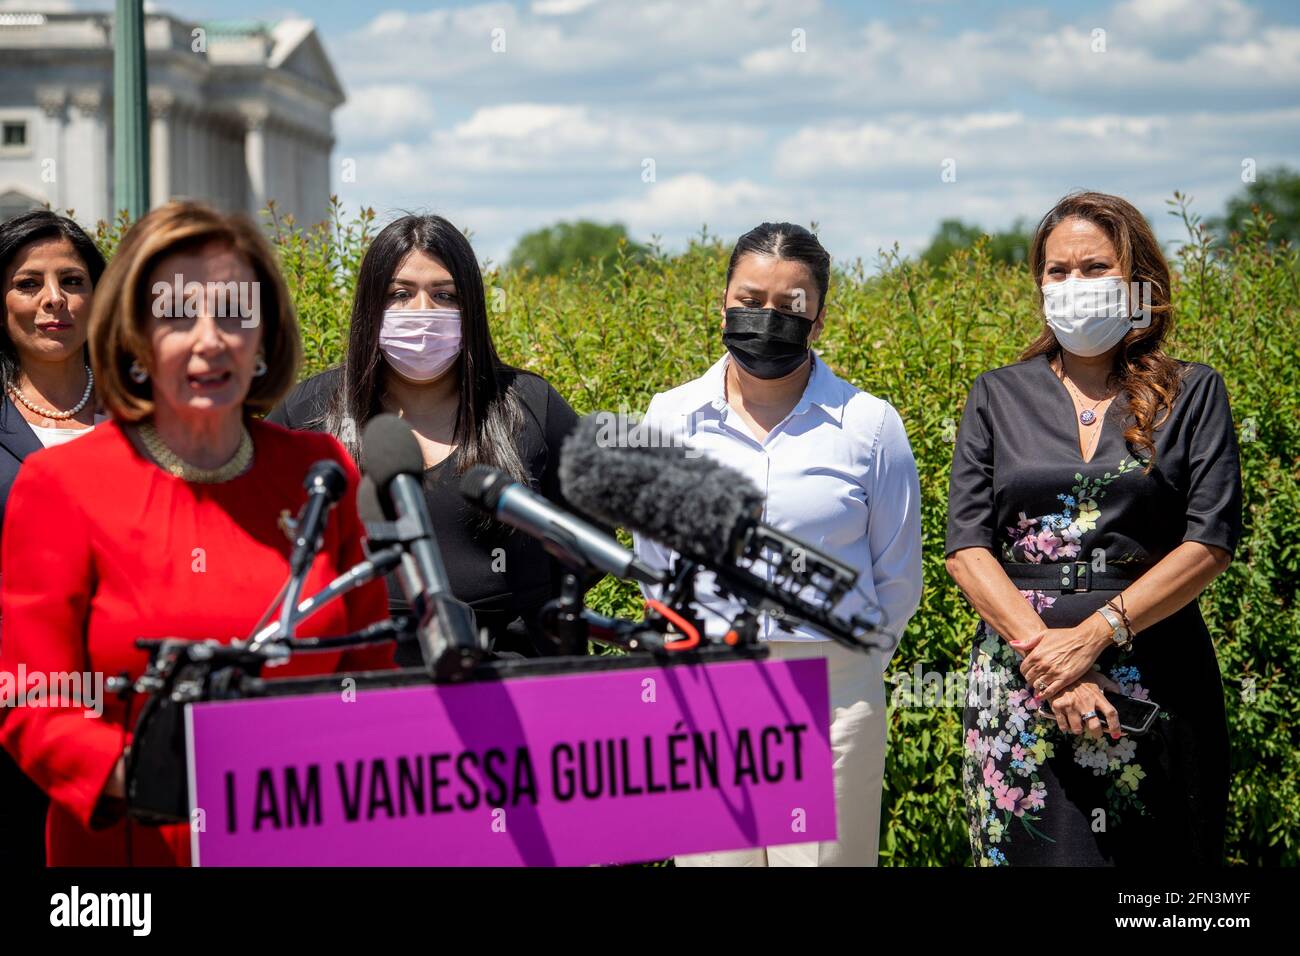 Mayra Guillen, third from left, Lupe Guillen, second from right, sisters of Vanessa Guillen, and United States Representative Veronica Escobar (Democrat of Texas), right, listen while Speaker of the United States House of Representatives Nancy Pelosi (Democrat of California) offers remarks during a press conference for the reintroduction of the I am Vanessa Guillén Act, outside the US Capitol in Washington, DC, Thursday, May 13, 2021. The killing of 20 year-old Army Specialist Vanessa Guillen at Fort Hood in Texas last year caused outrage, as Guillen's family said Vanessa was harassed prior to Stock Photo